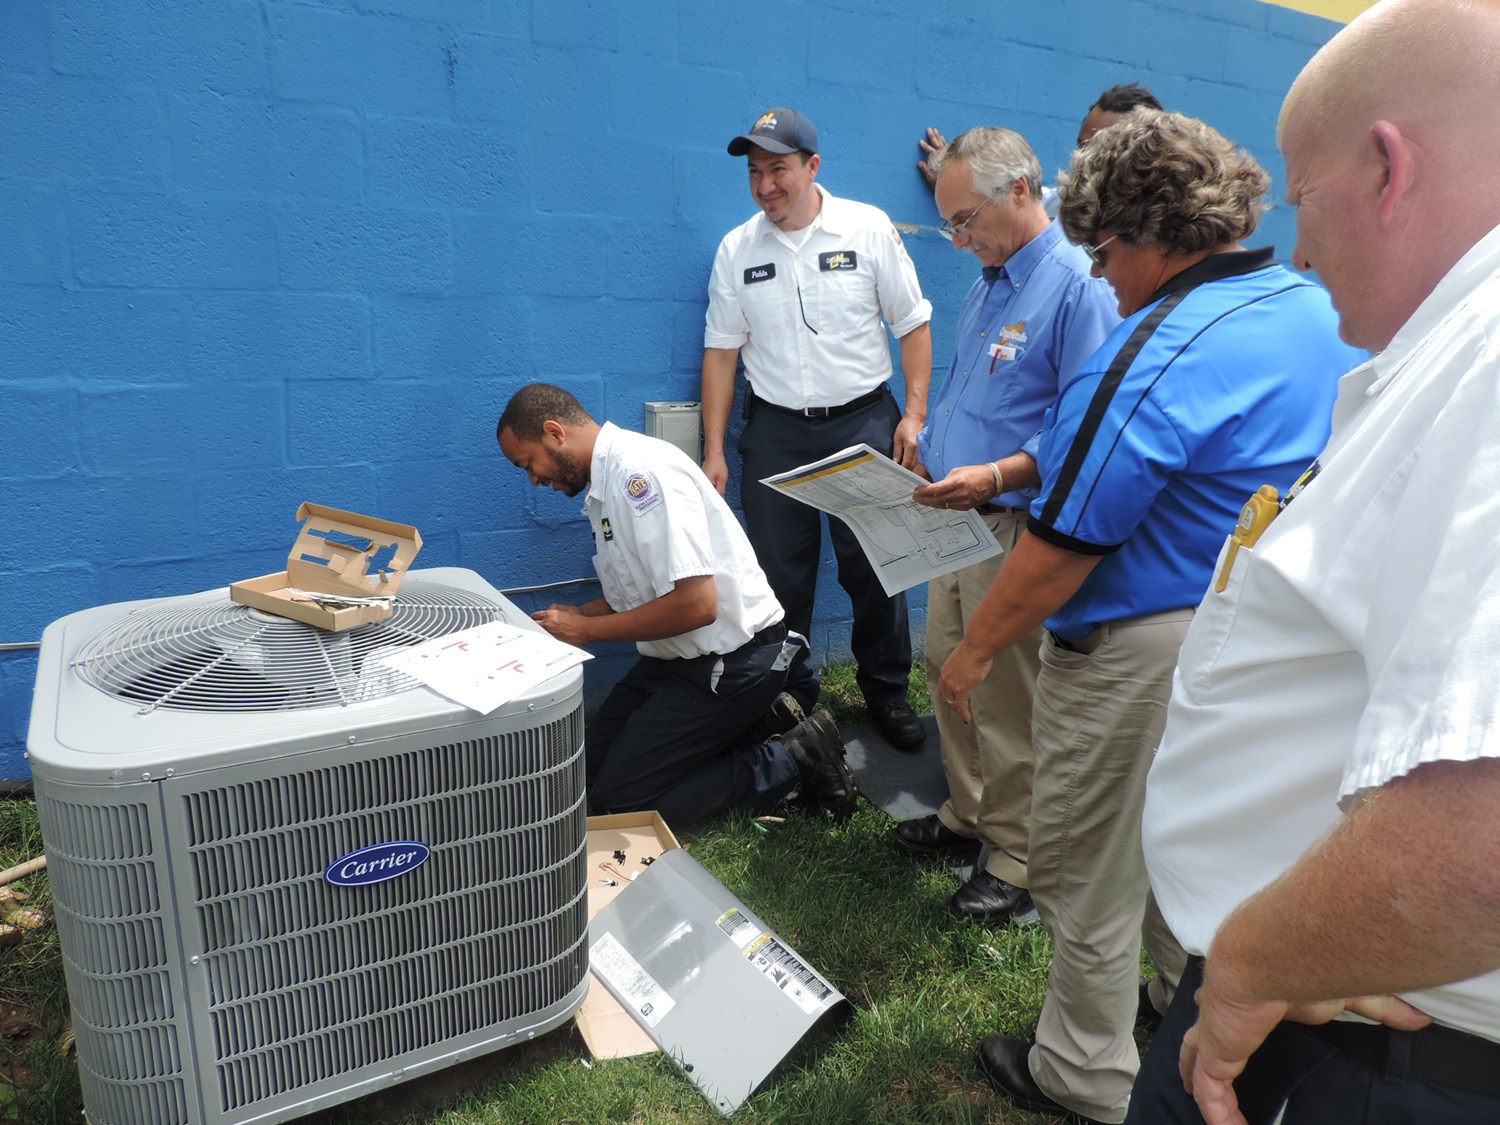 Multiple CroppMetcalfe technicians standing around an AC unit working on repairs. 